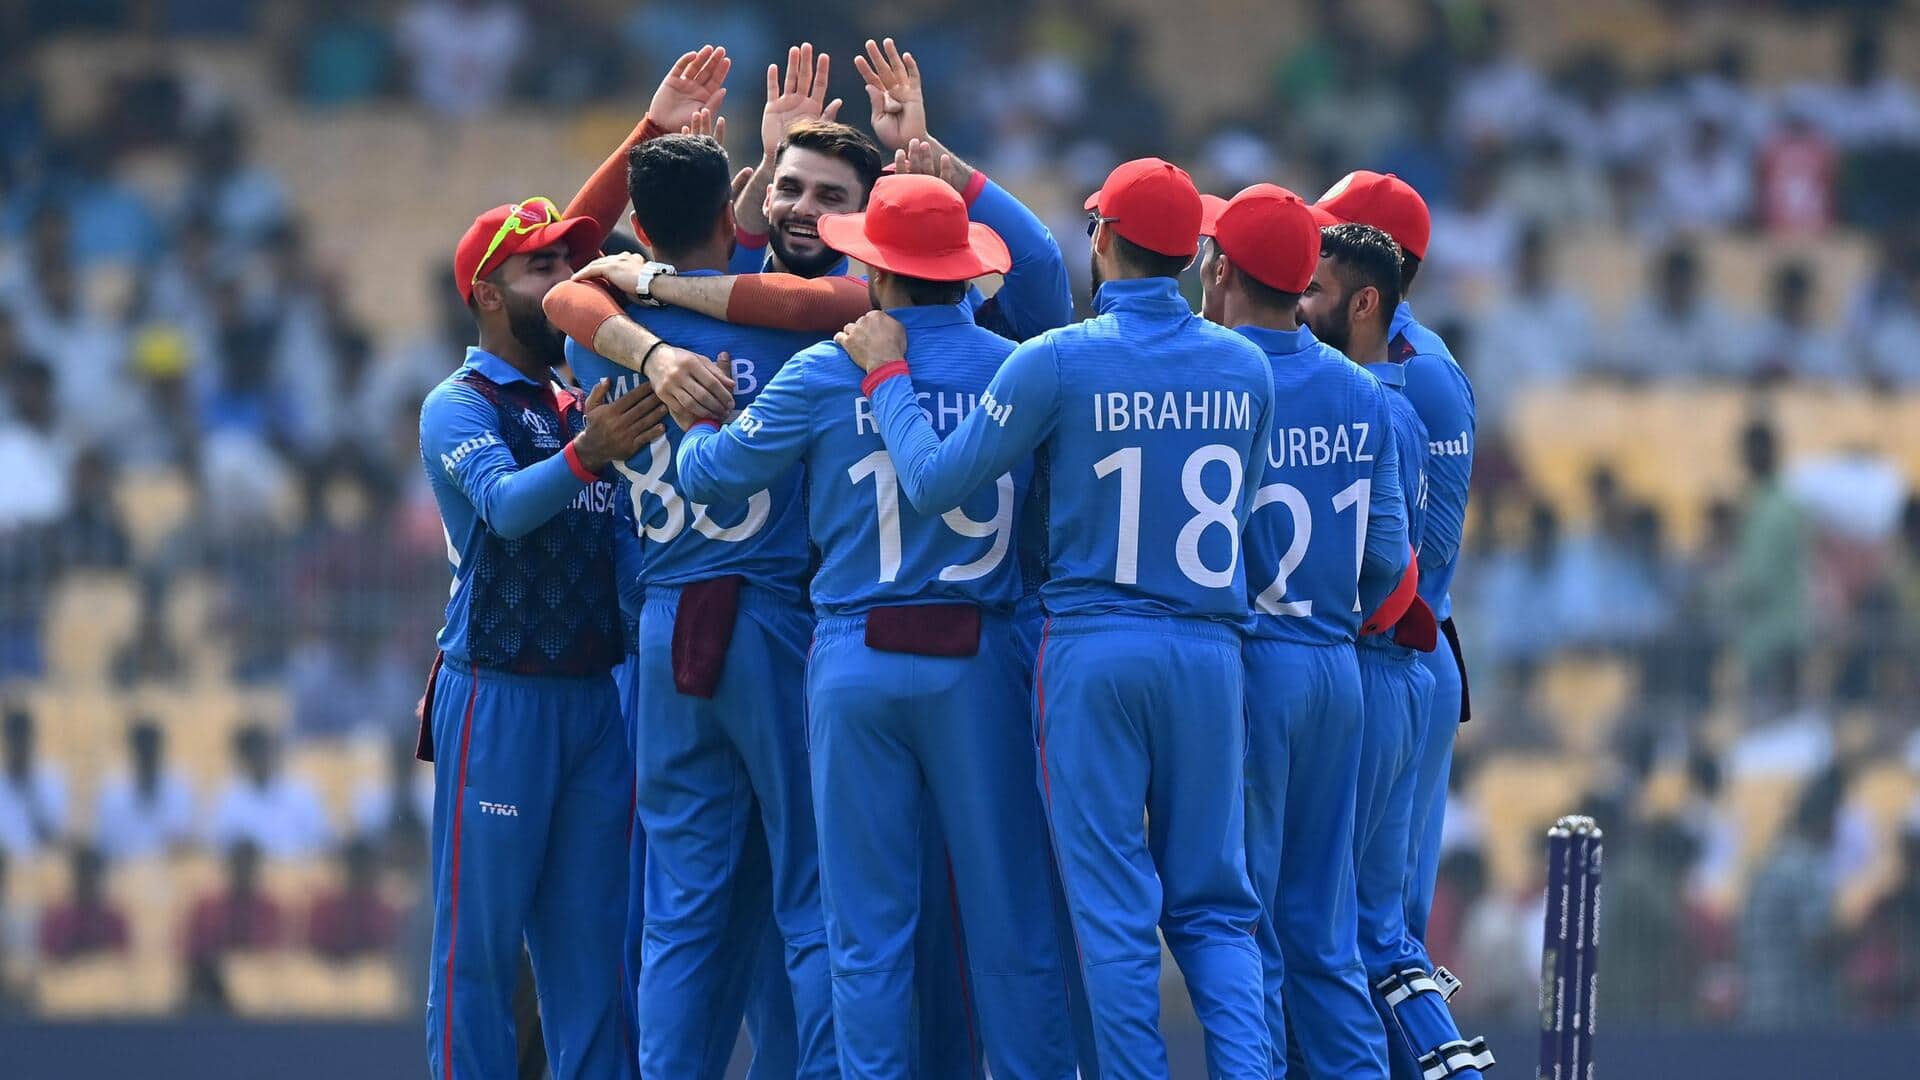 Afghanistan register their second-lowest total in ODI World Cup history